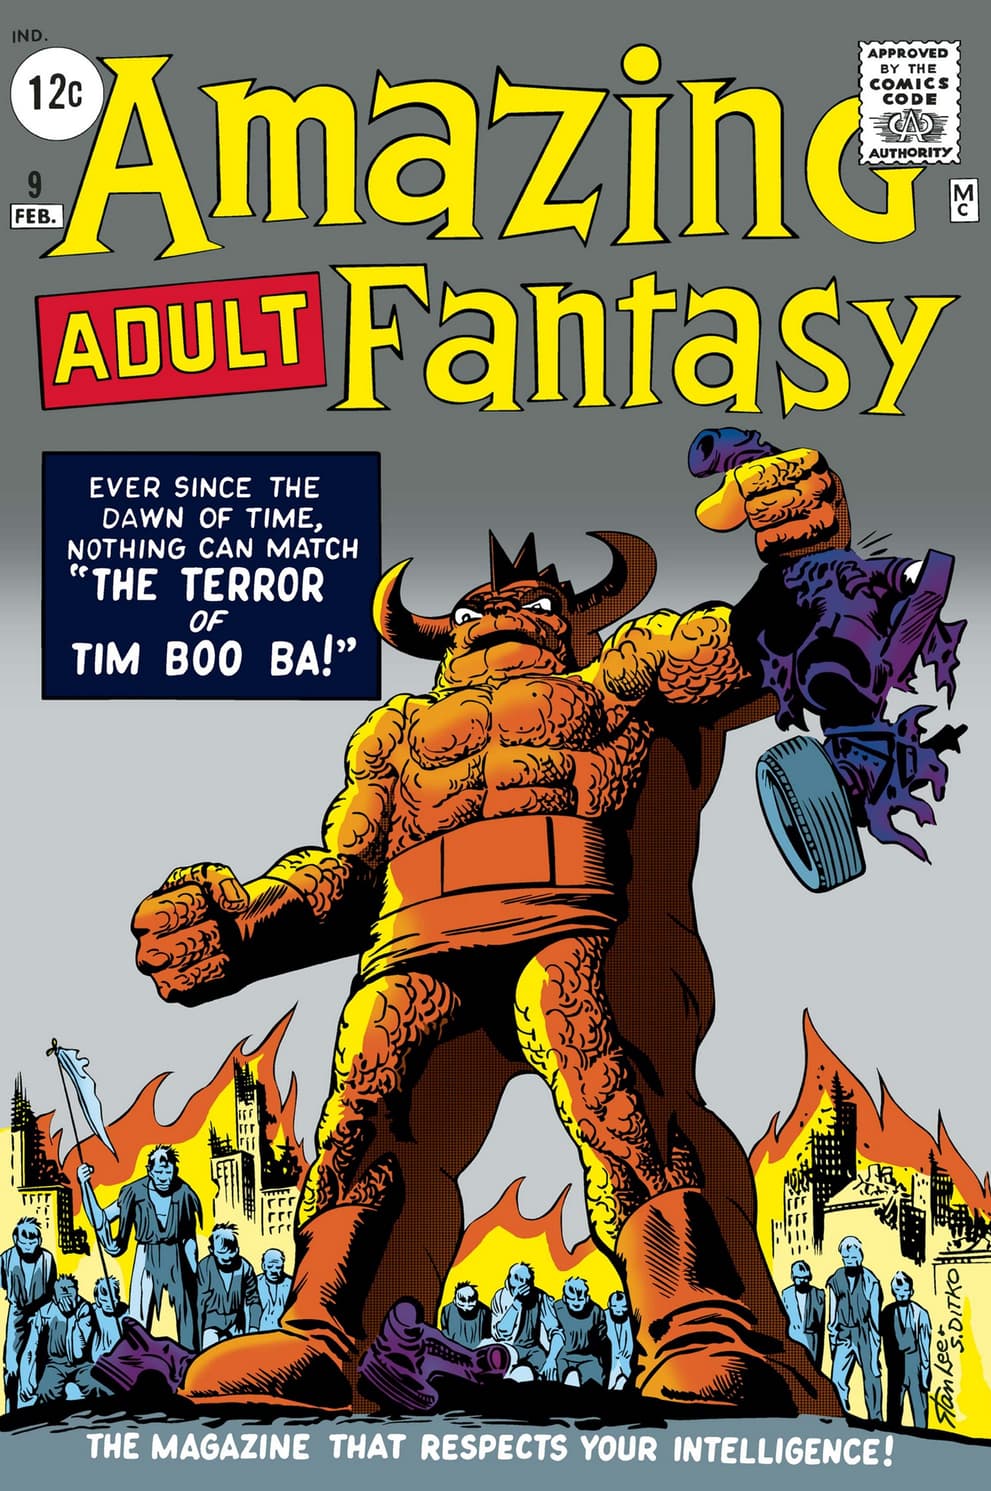 AMAZING ADULT FANTASY (1961) #9 cover by Steve Ditko and Stan Goldberg